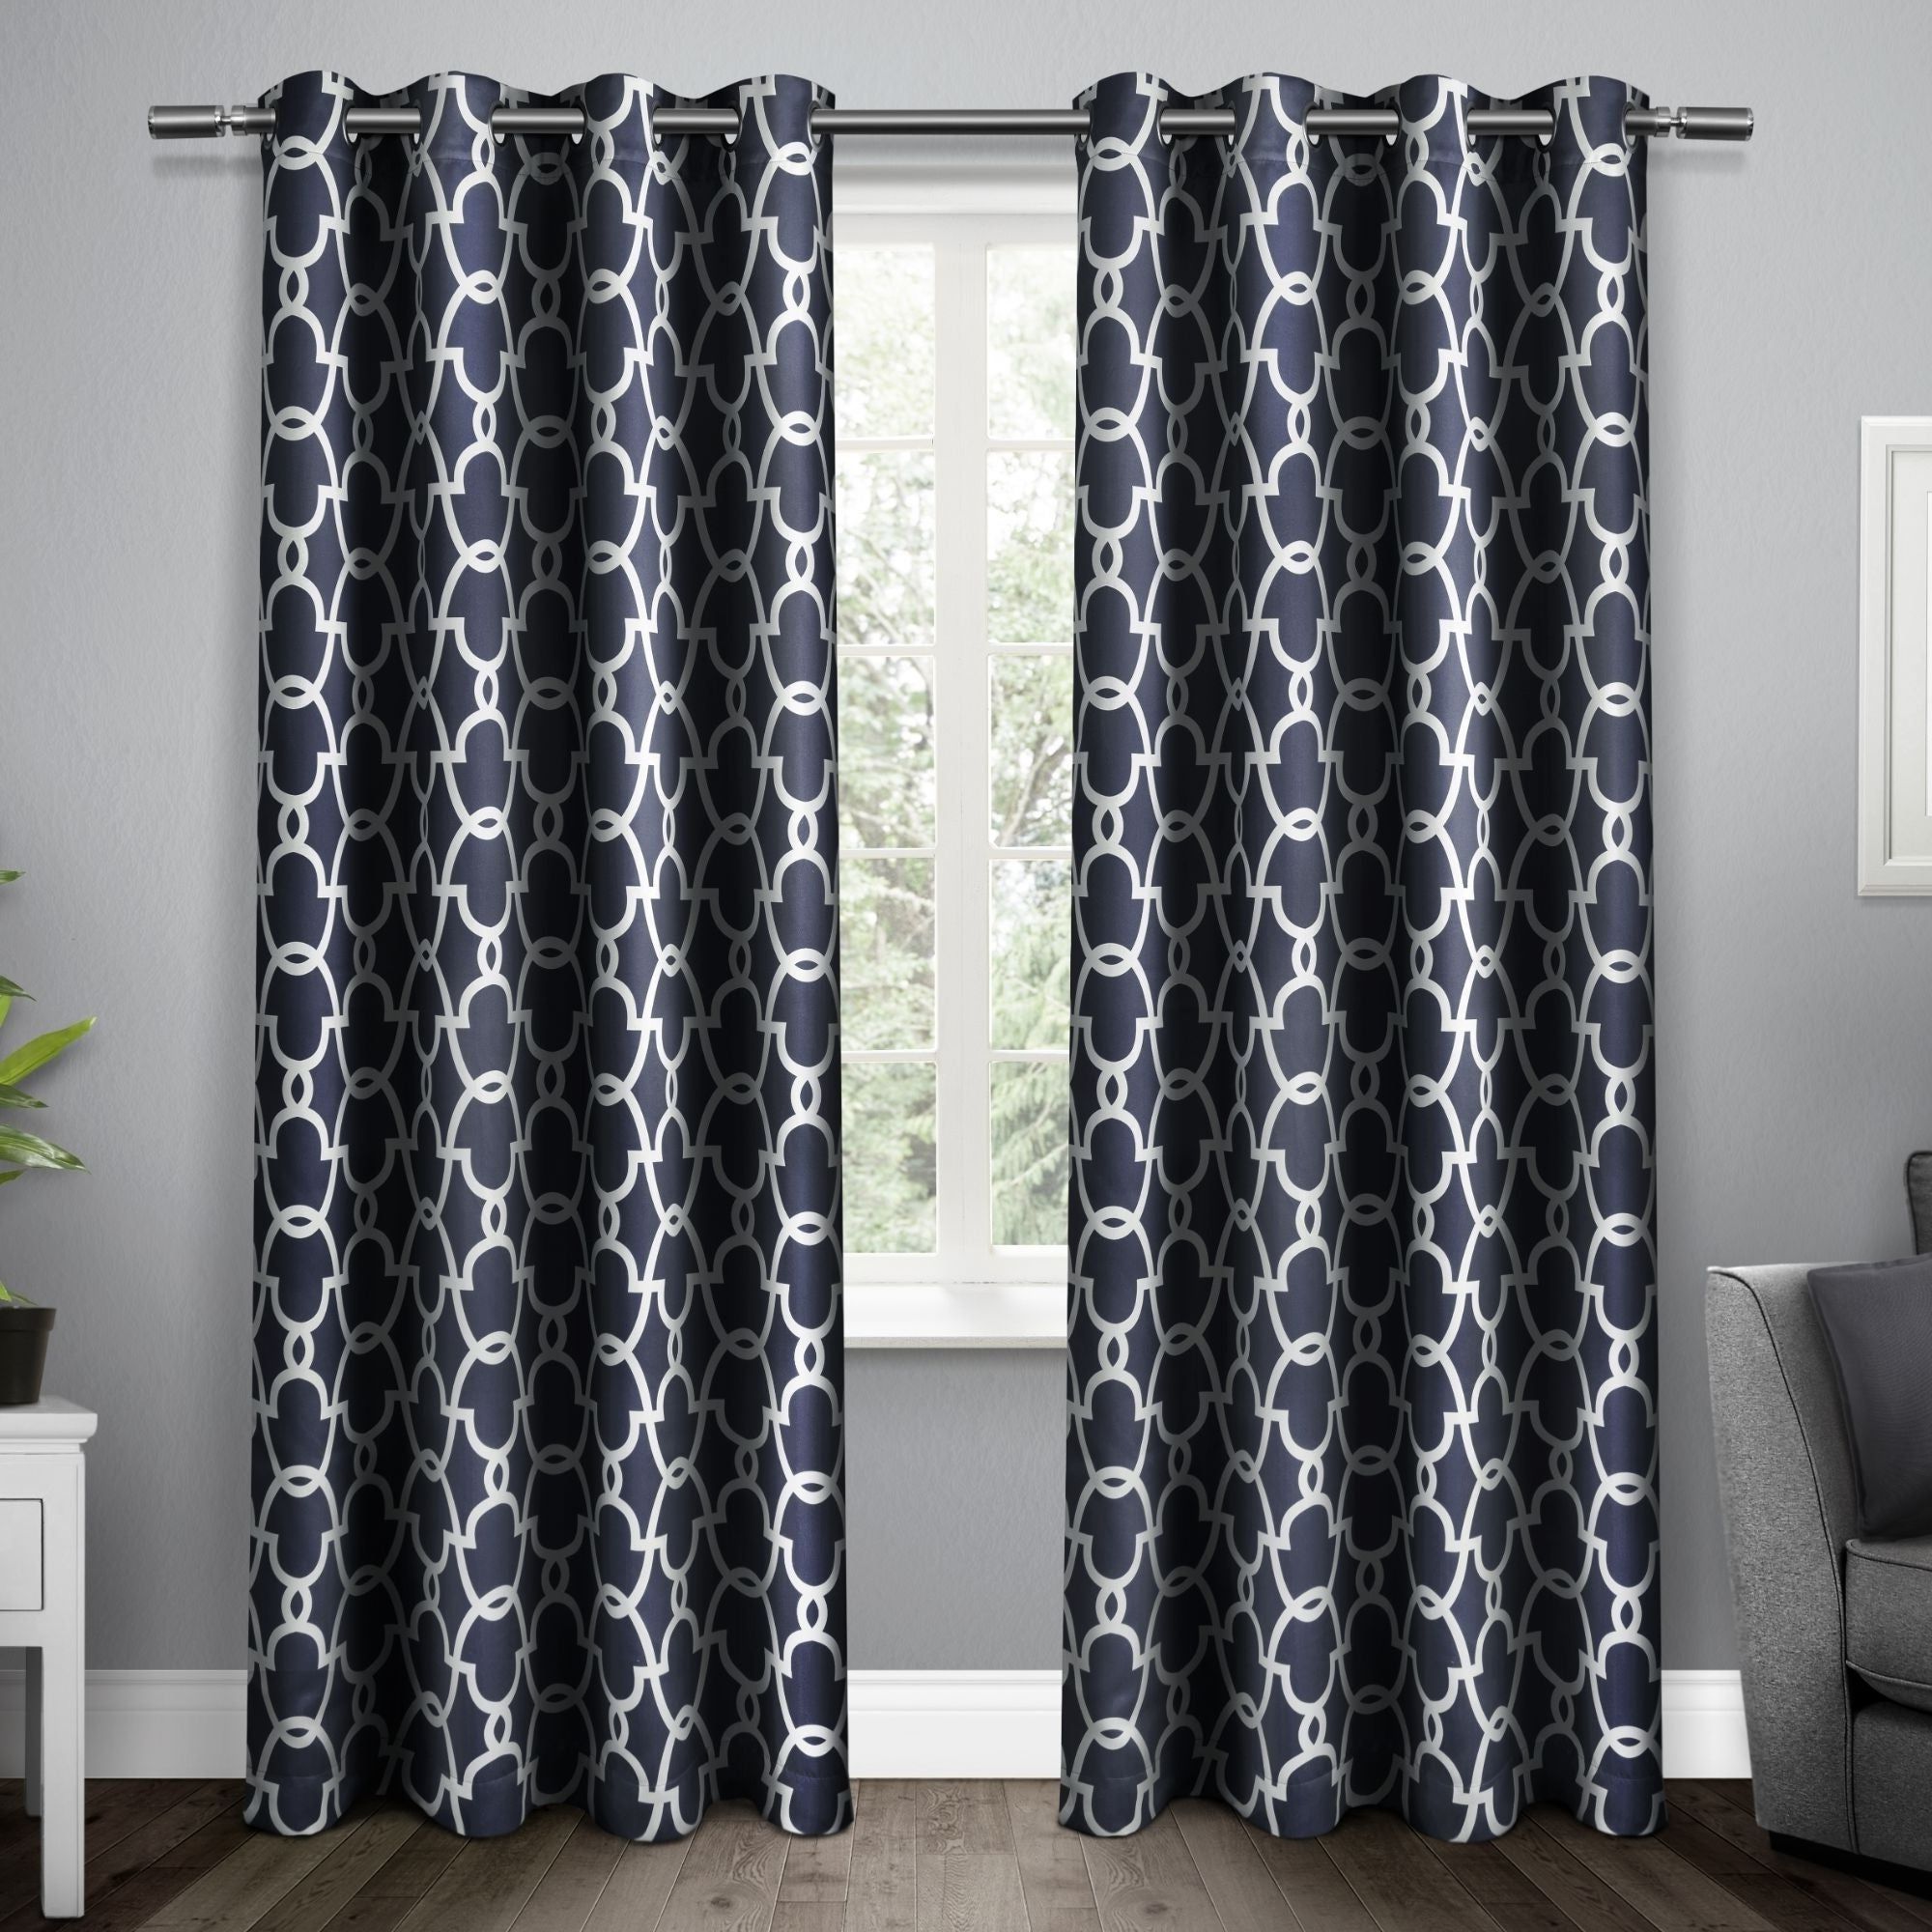 Recent The Curated Nomad Vicksburg Thermal Woven Blackout Grommet Top Curtain  Panel Pair Pertaining To The Curated Nomad Duane Blackout Curtain Panel Pairs (View 20 of 20)